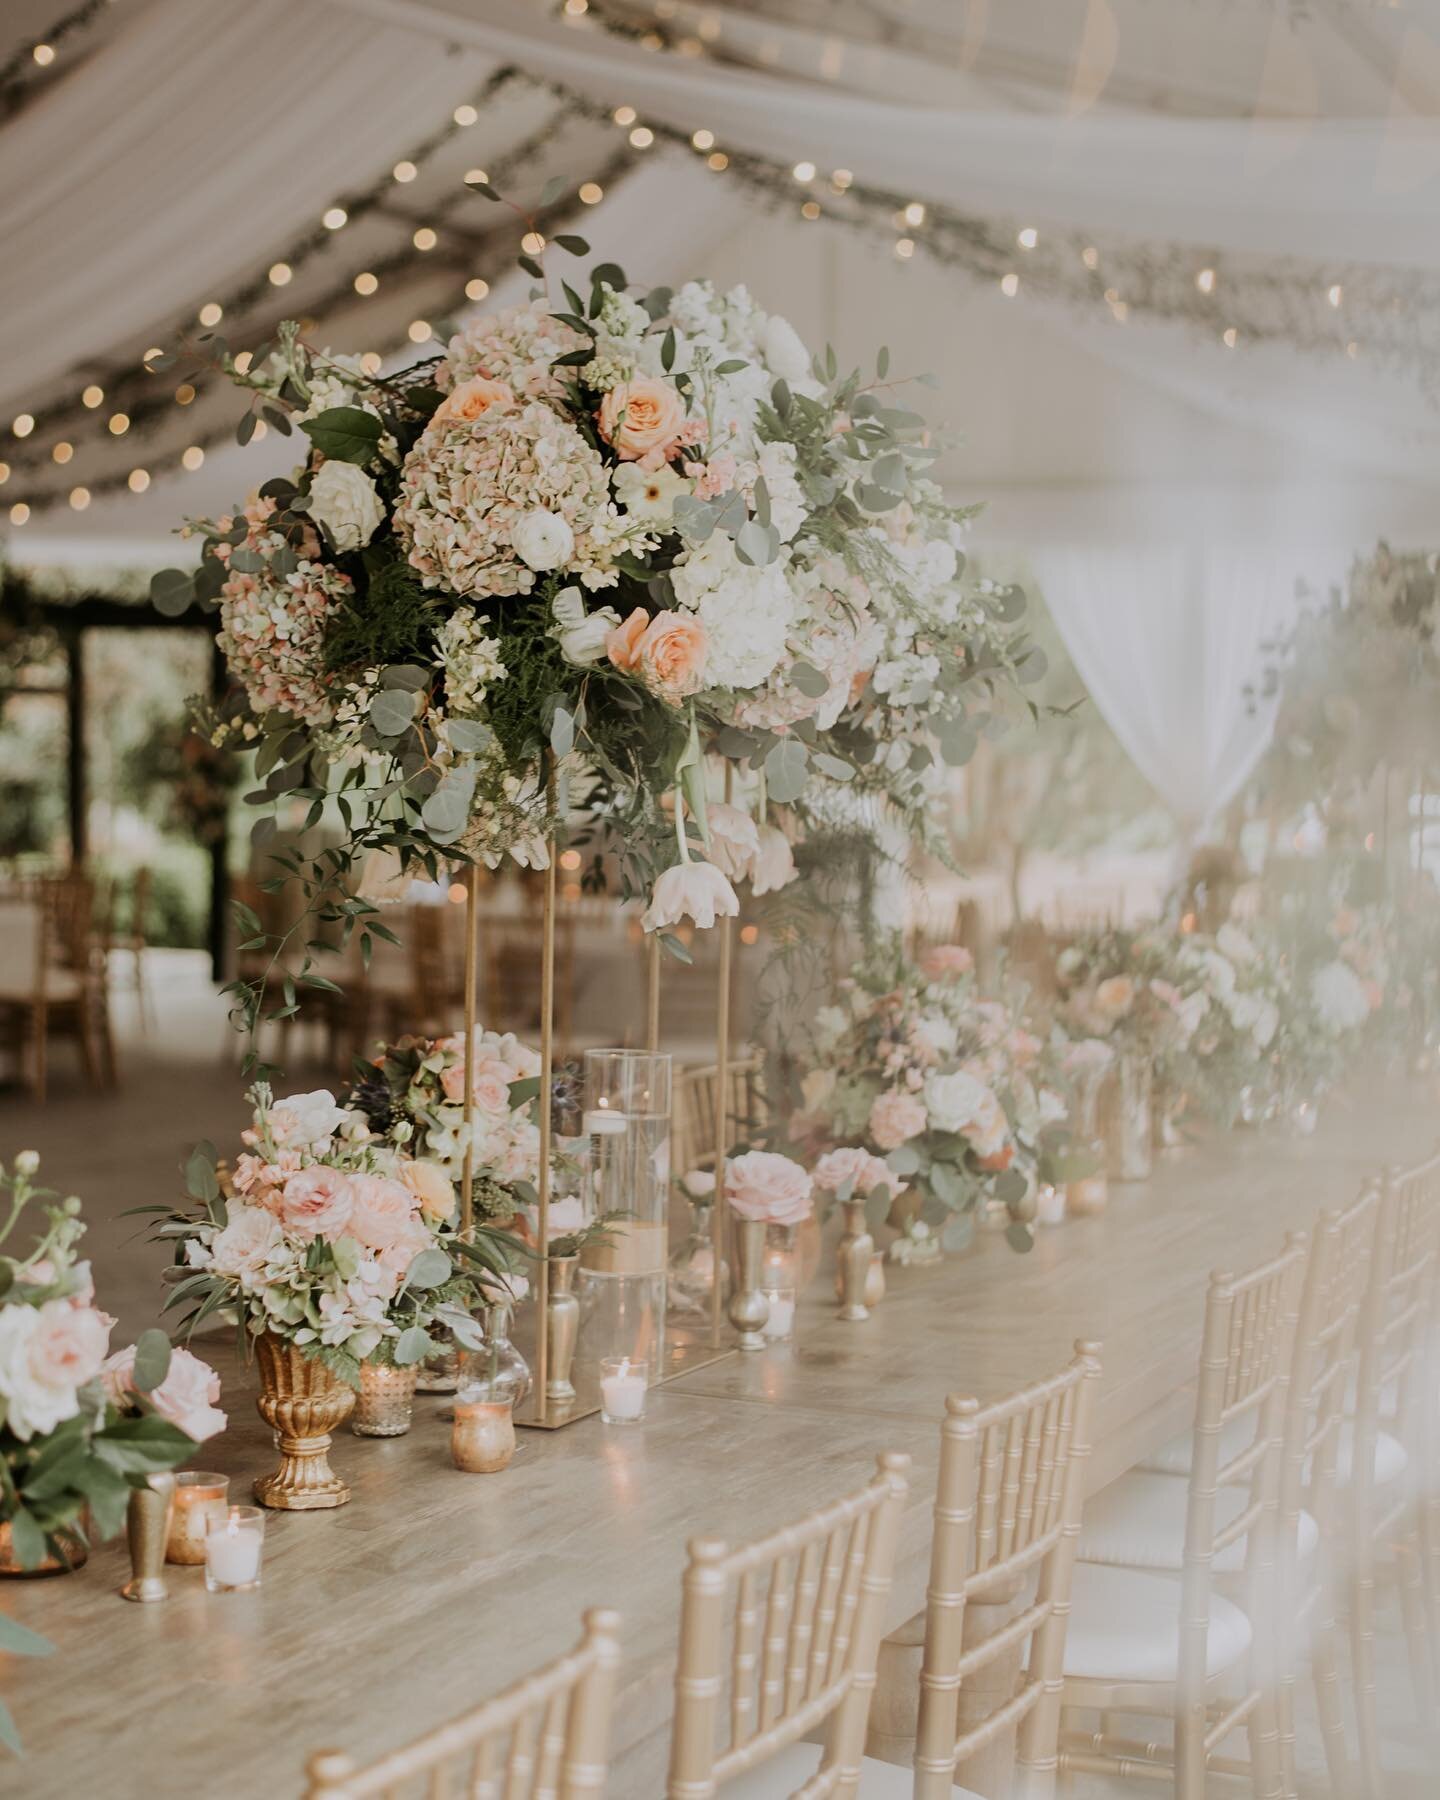 Spring is coming&hellip;and it&rsquo;s going to be dreamy! Love this dreamlike shot by @connectionphotography from Sarah + Chris&rsquo; wedding day! 
.
.
.
#weddingplanningcharlotte #jackiefogartieevents #charlotteweddings #weddingplannercharlotte #c